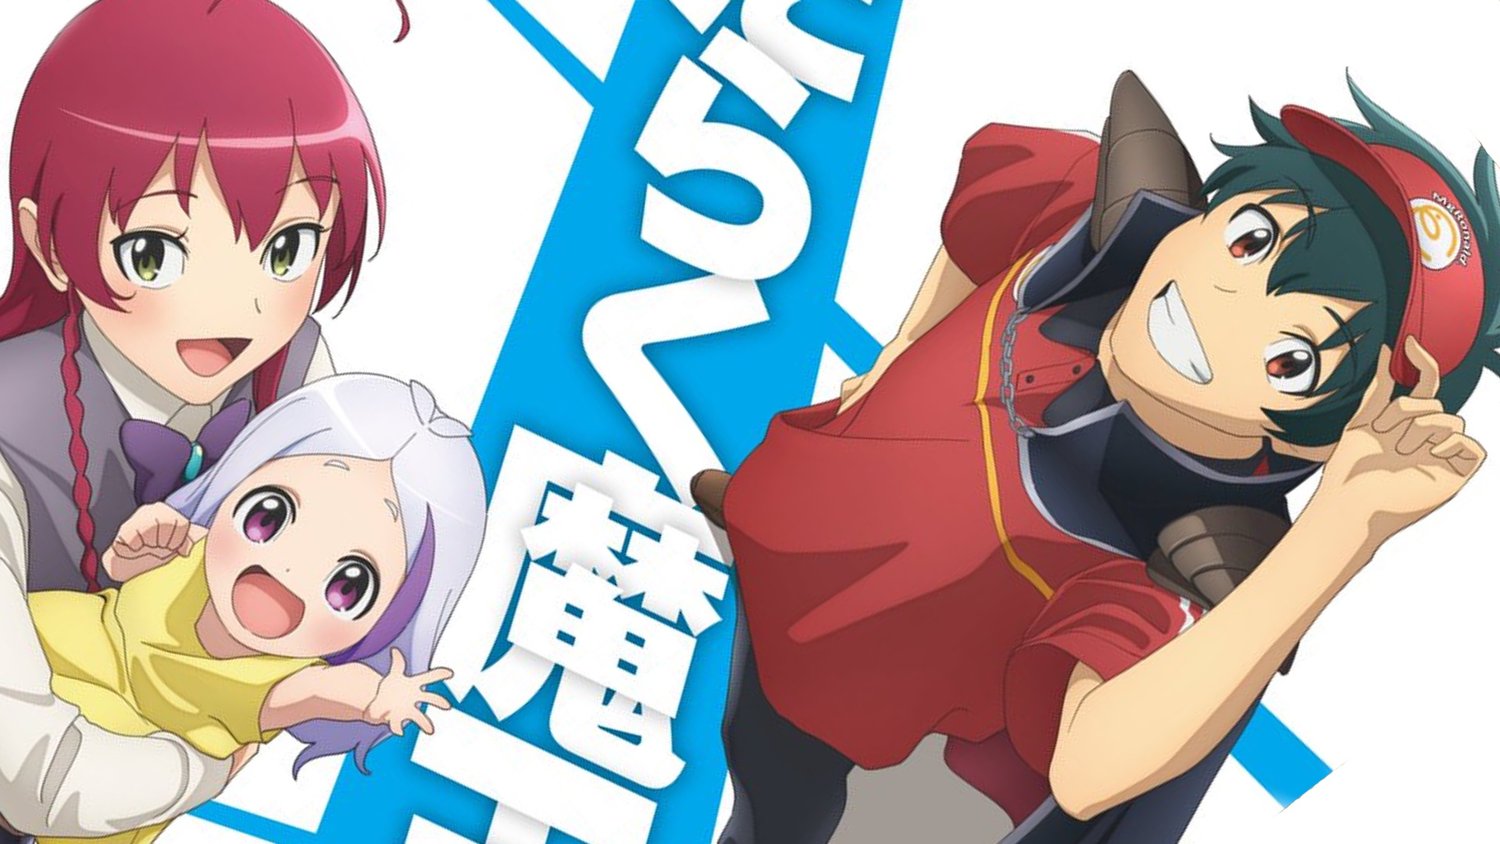 The Devil is a Part-Timer Season 2 Releases Episode 3 Preview - Anime Corner